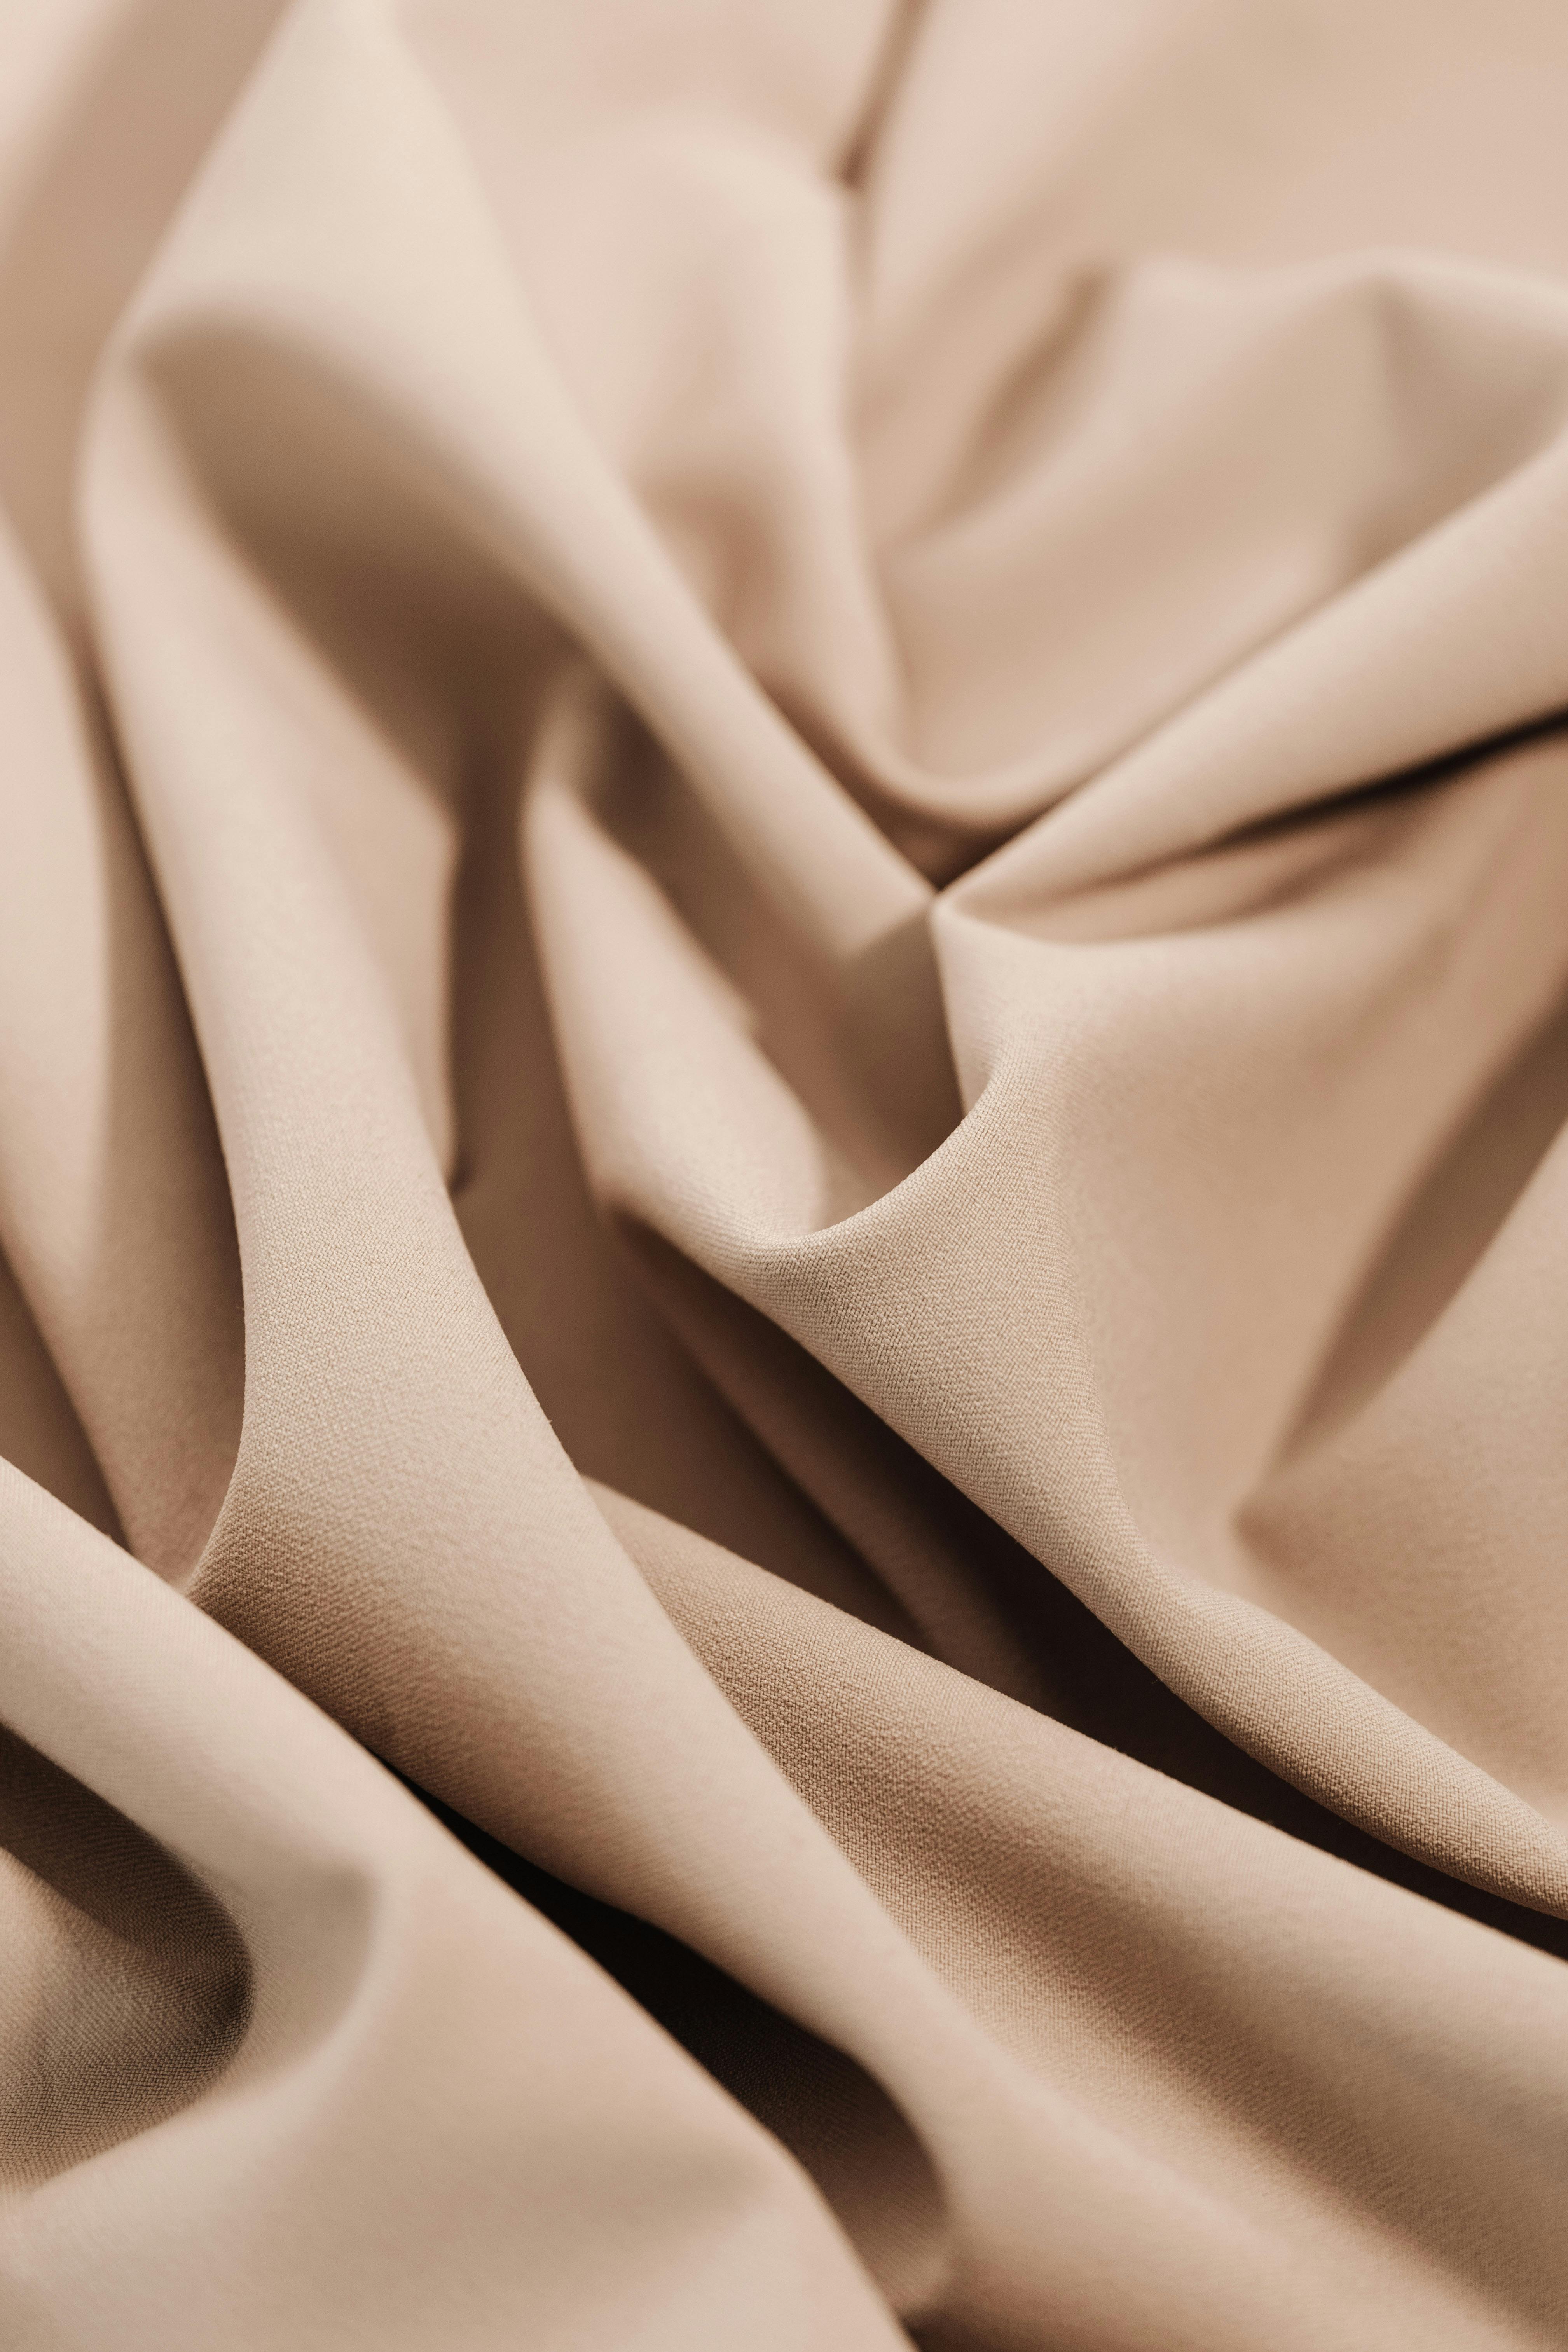 Fabric Cotton Cloth Texture Stock Photo, Picture and Royalty Free Image.  Image 87894515.